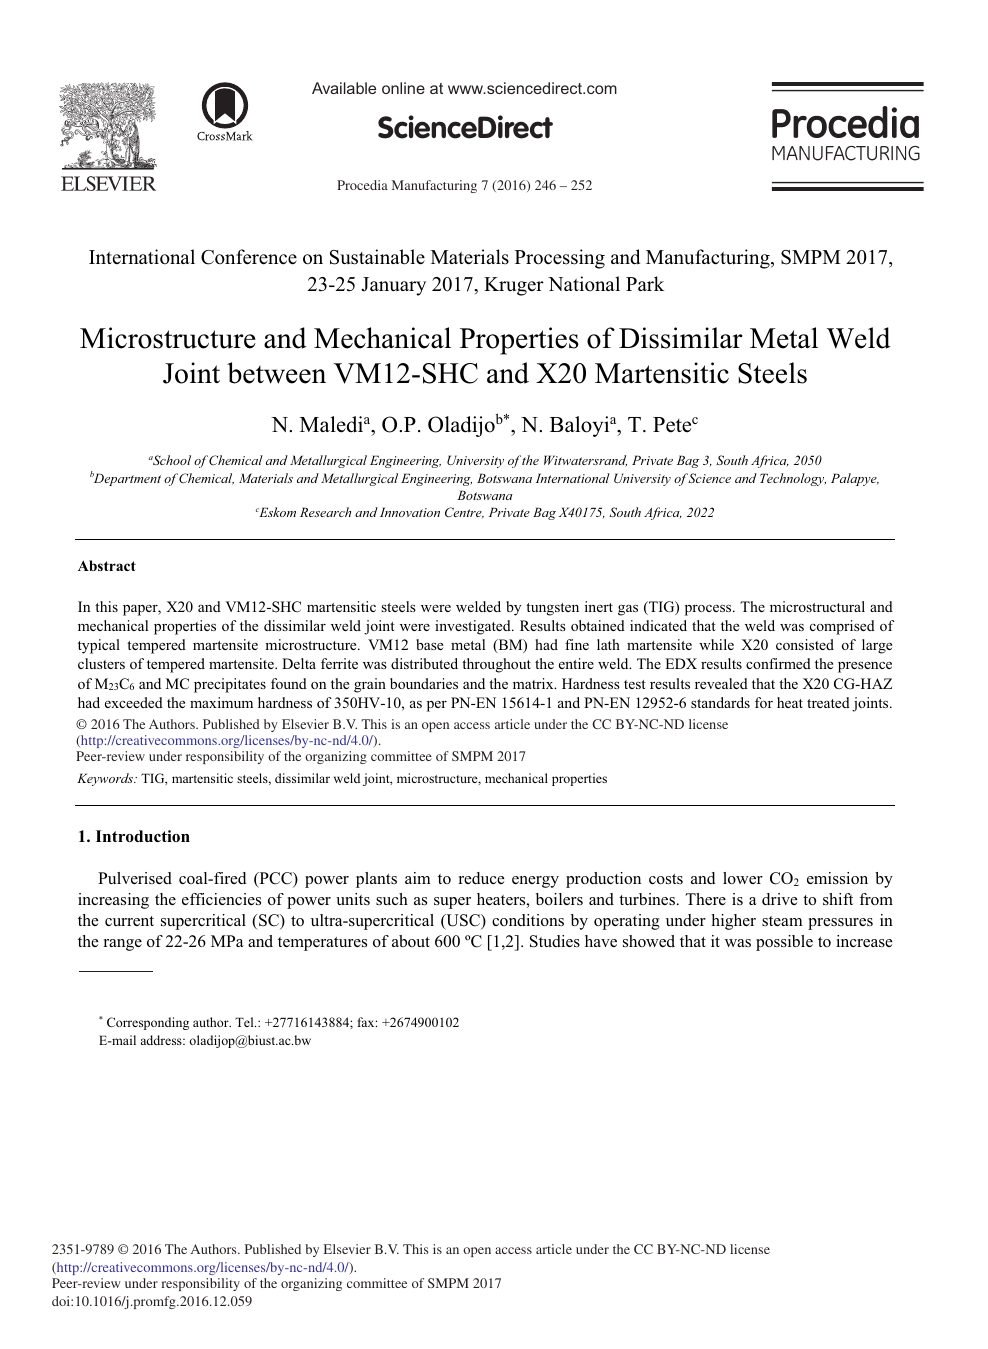 Microstructure And Mechanical Properties Of Dissimilar Metal Weld Joint Between Vm12 Shc And X Martensitic Steels Topic Of Research Paper In Materials Engineering Download Scholarly Article Pdf And Read For Free On